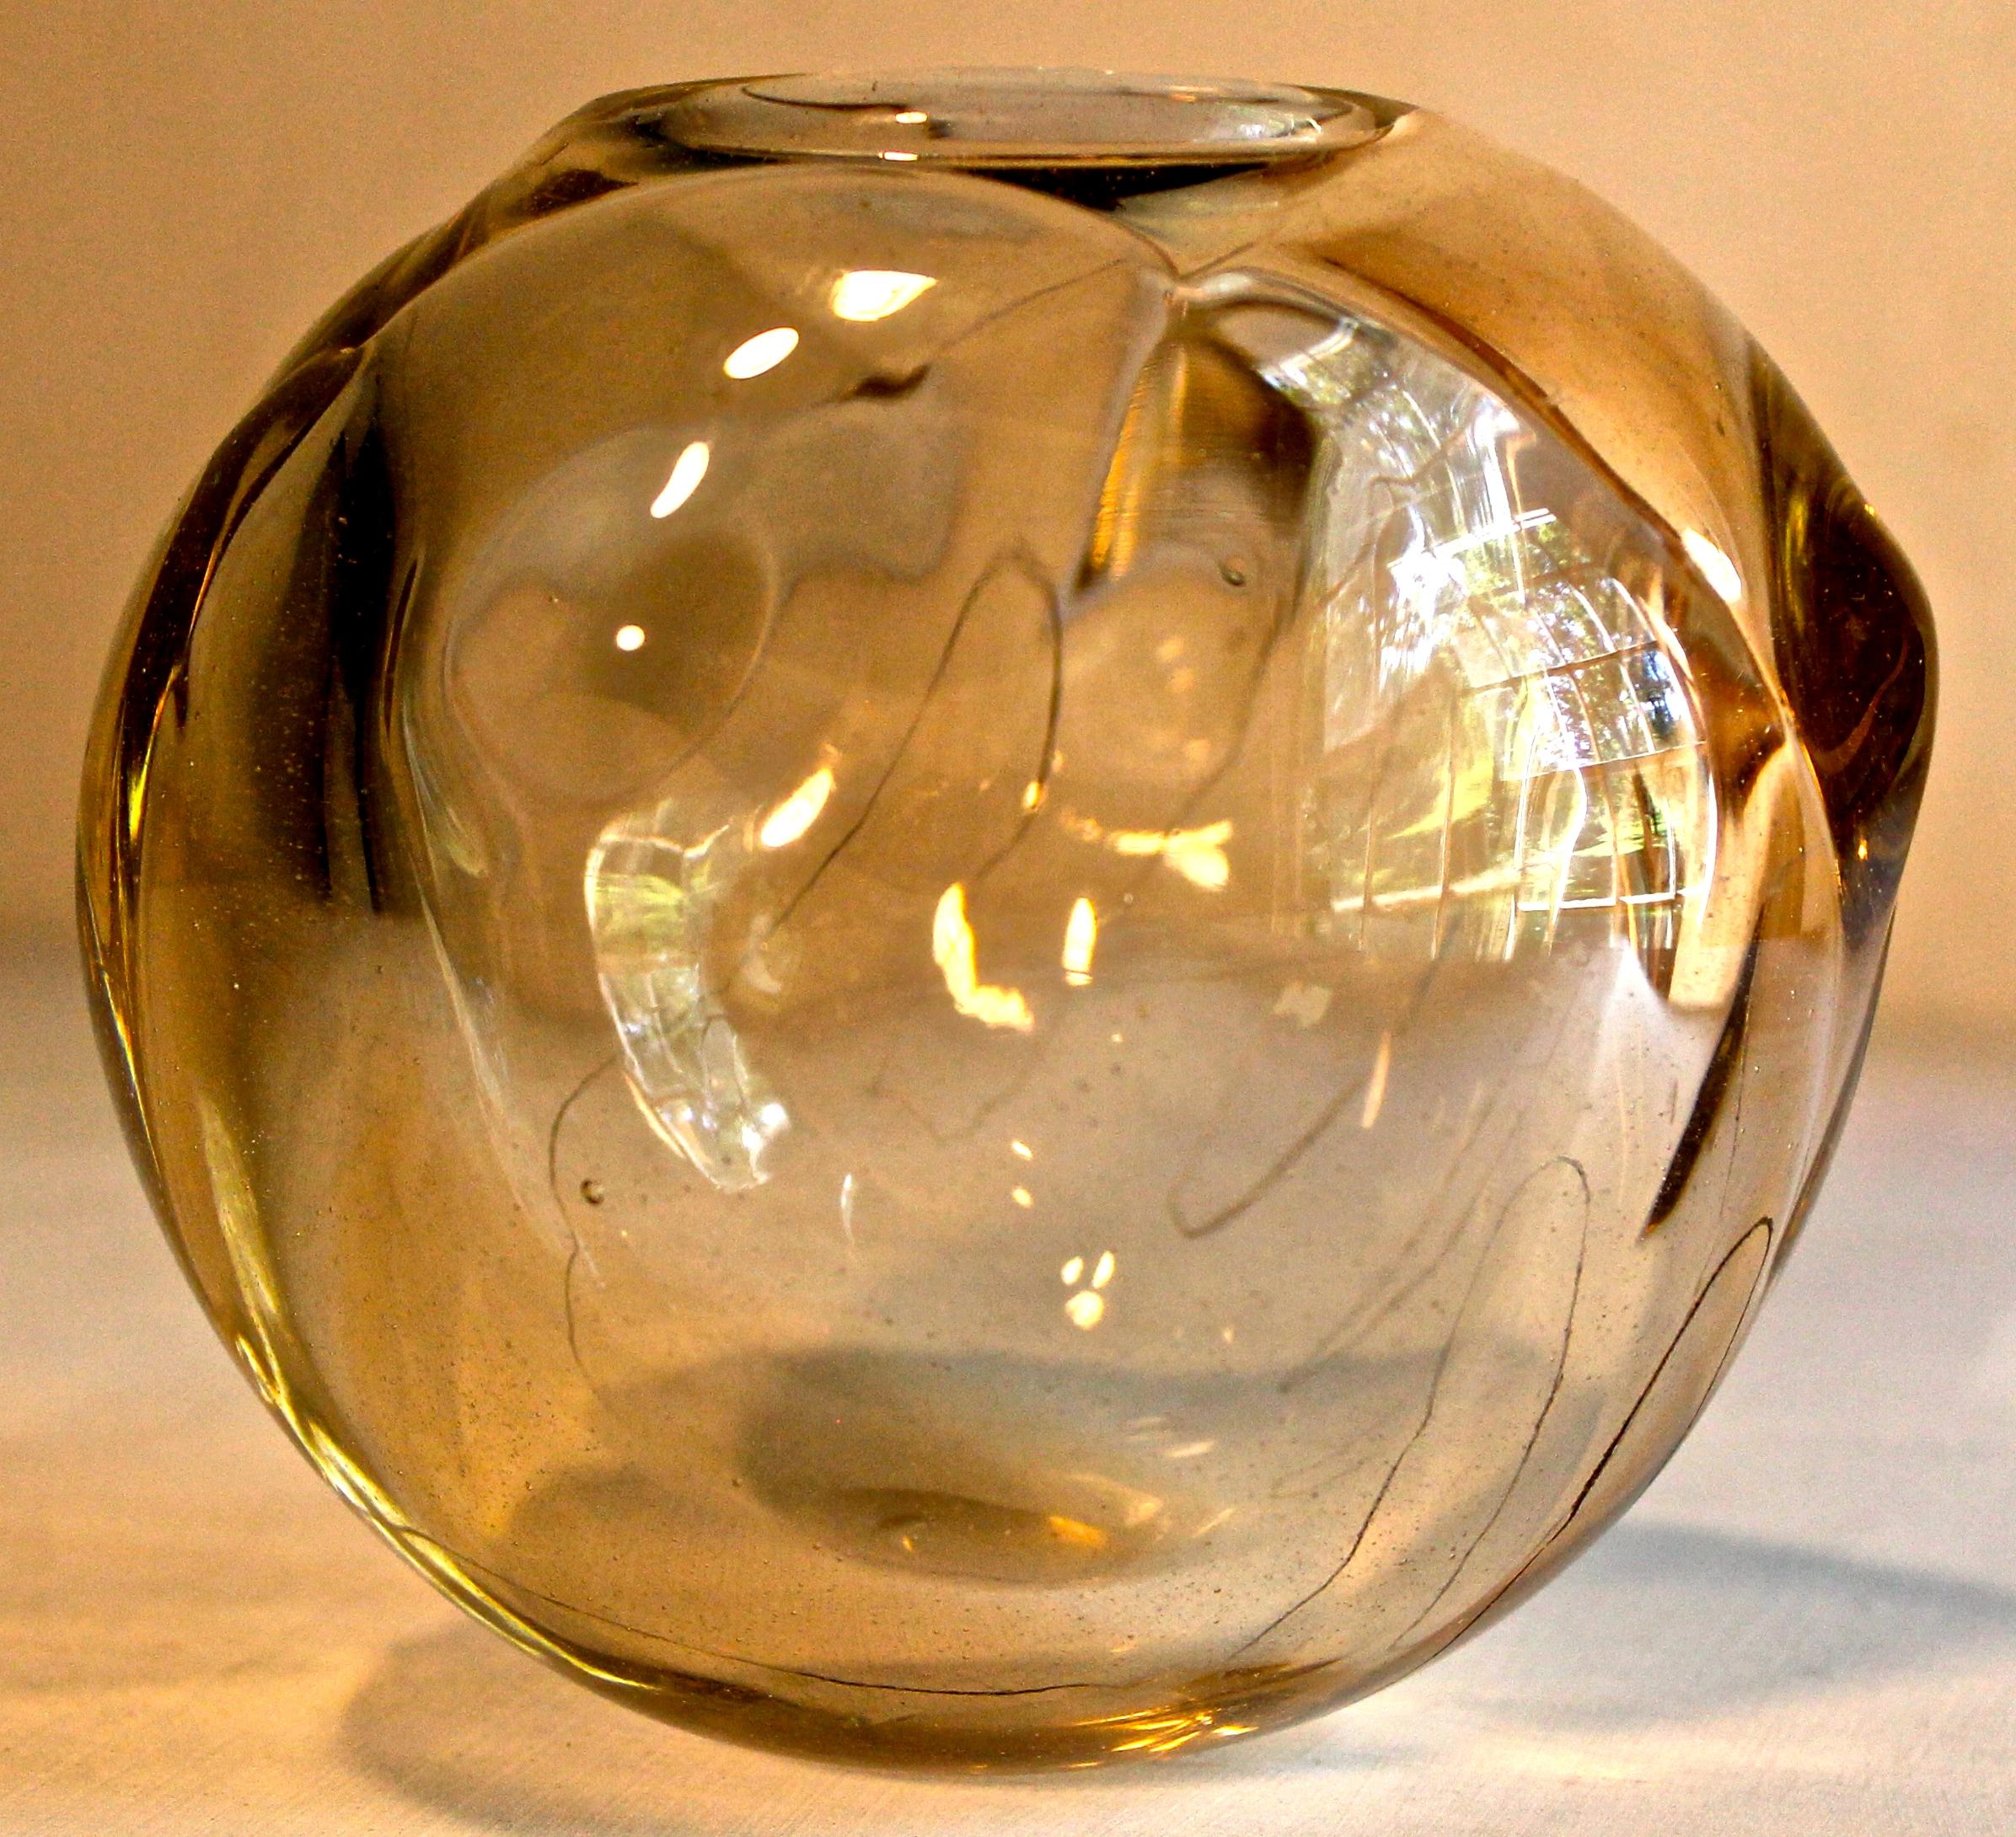 Amber glass with a meandering etched line outlining a hand holding the bowl. Signed and dated 1980, and annotated as a gift in 1982.

Peter Pellettieri (1939-1997), was a Fulbright Scholar and recipient of a grant from the Italian Government. His